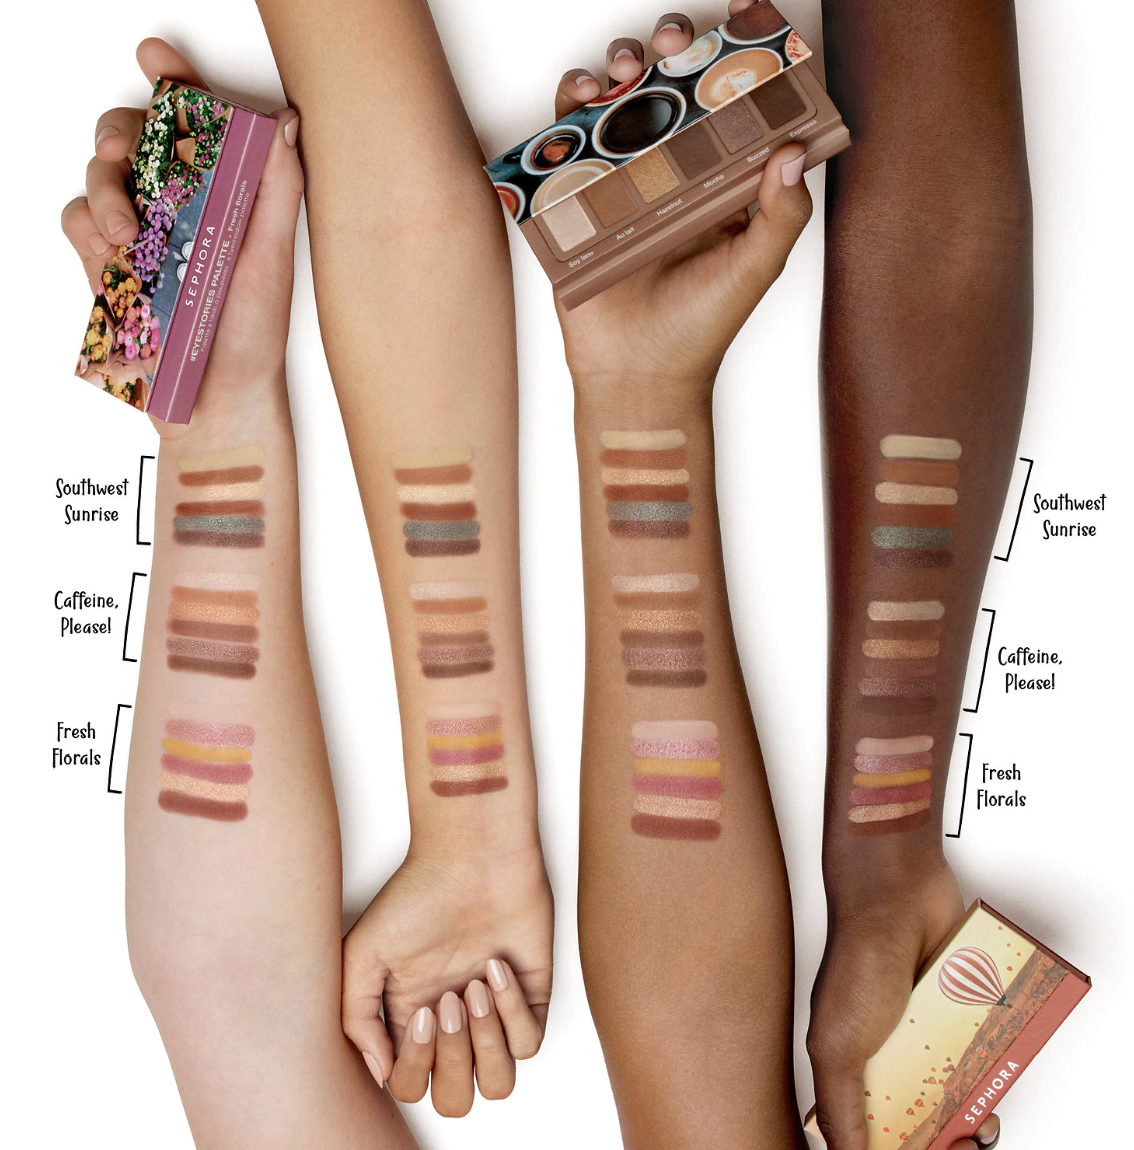 Arm swatches of the eyeshadows in various shades of brown, bronze, cream, pink, and blue 